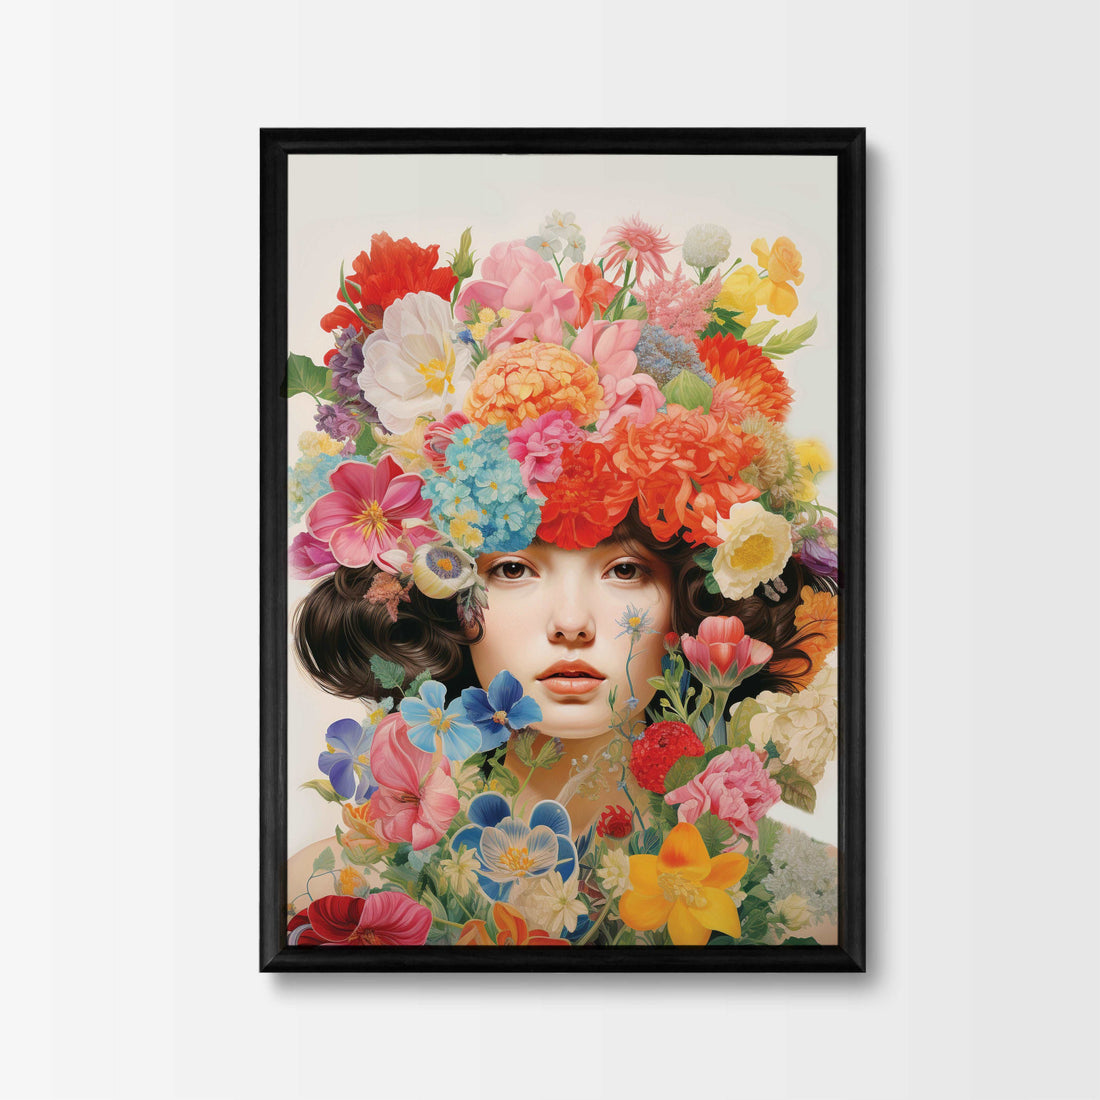 Poster Floral Embrace - Add sophistication to your home